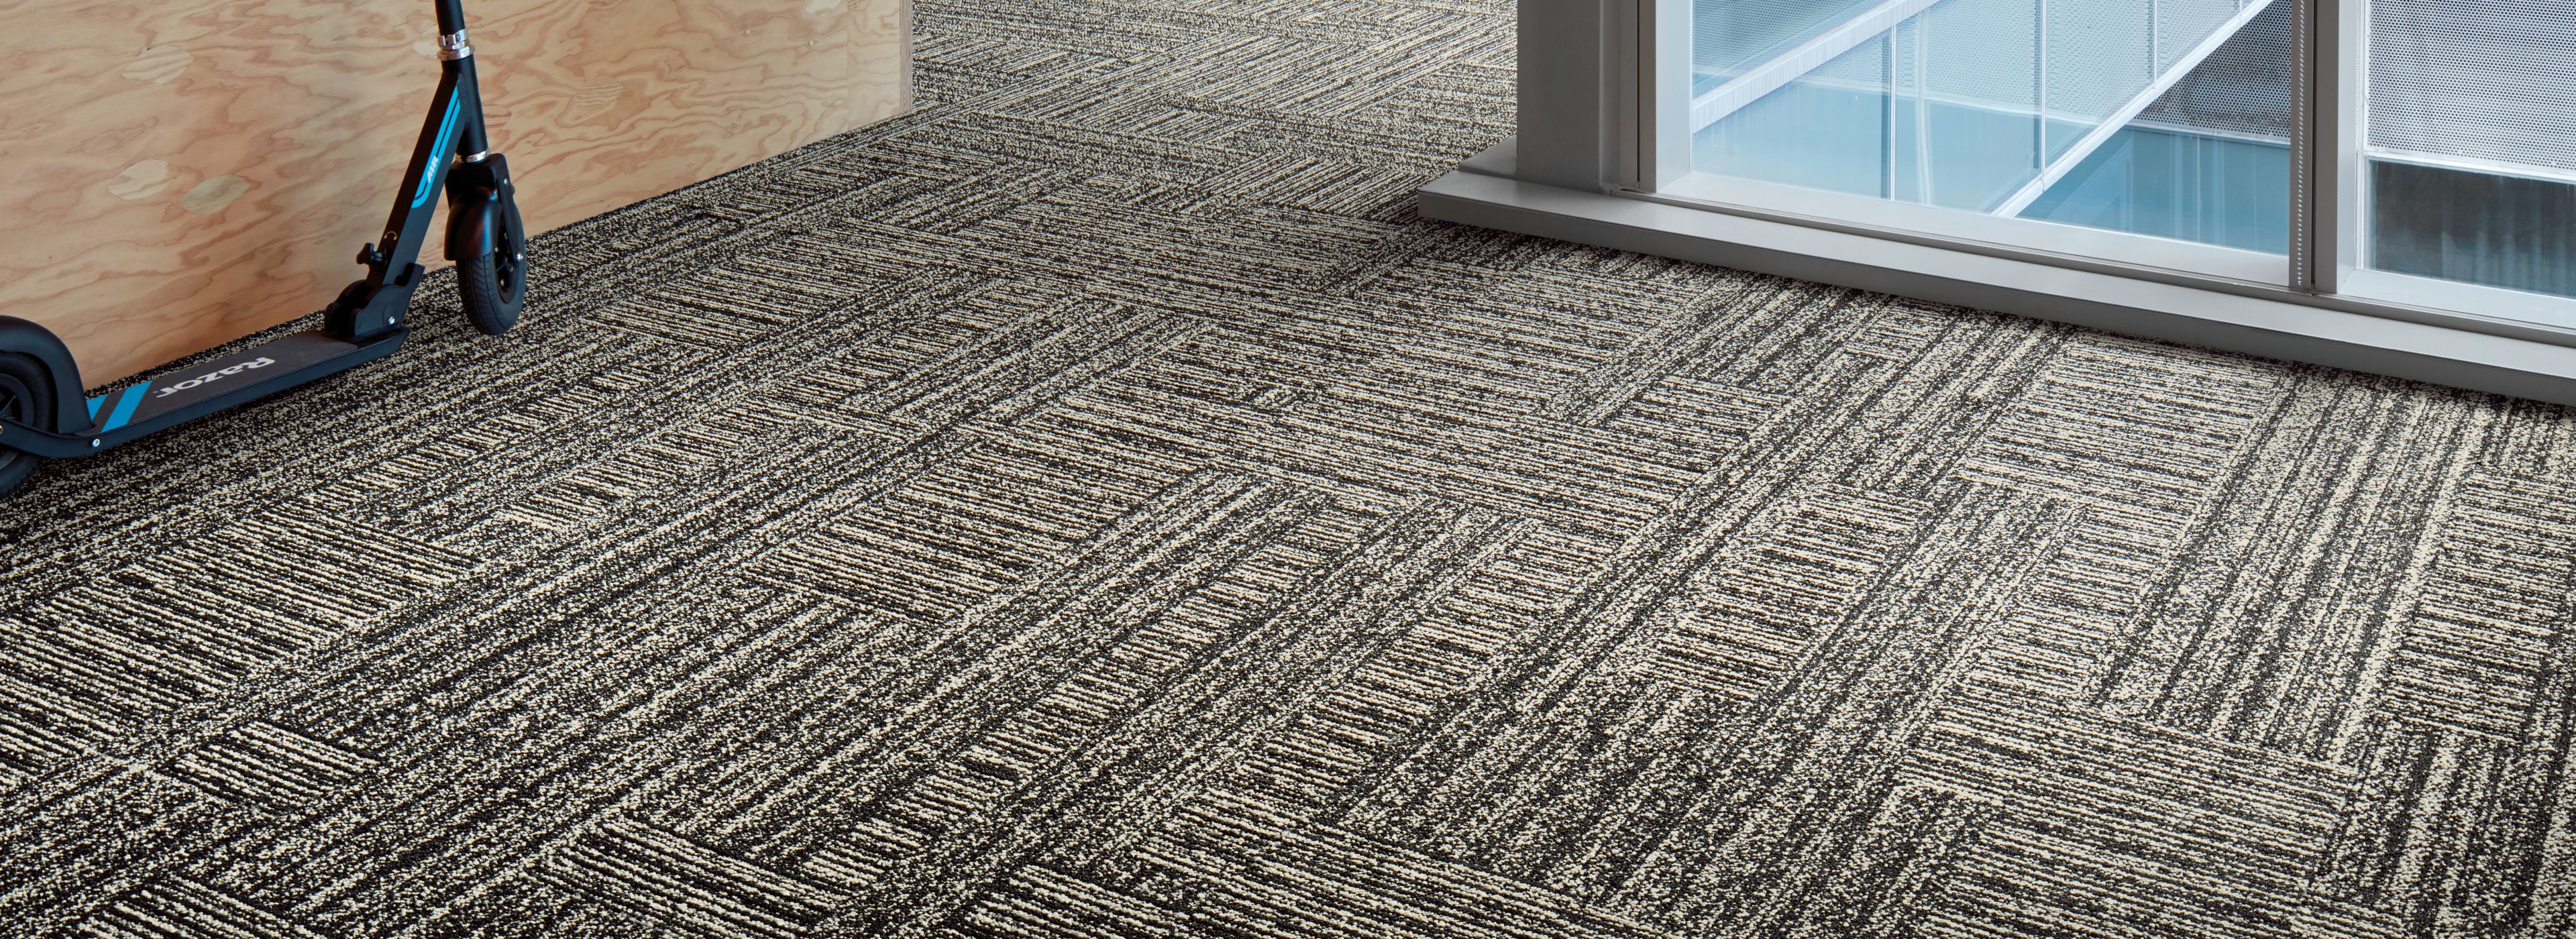 Interface Decibel and Hard Drive plank carpet tile in small area with glass windows numéro d’image 1